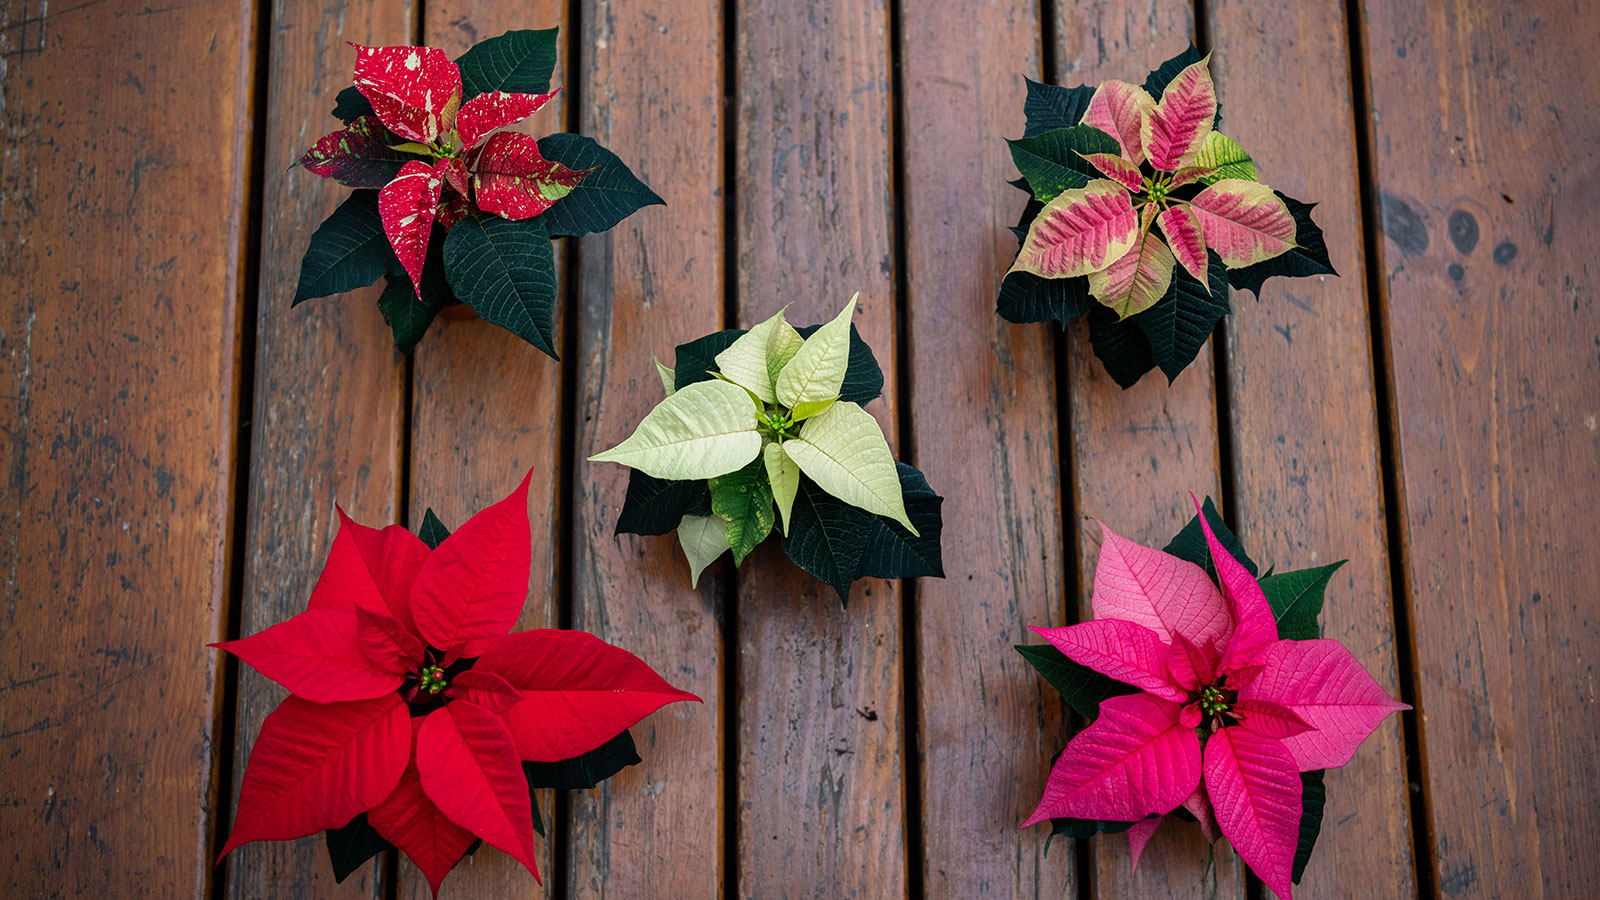 Poinsettia Meaning: A Symbol of Love and Joy